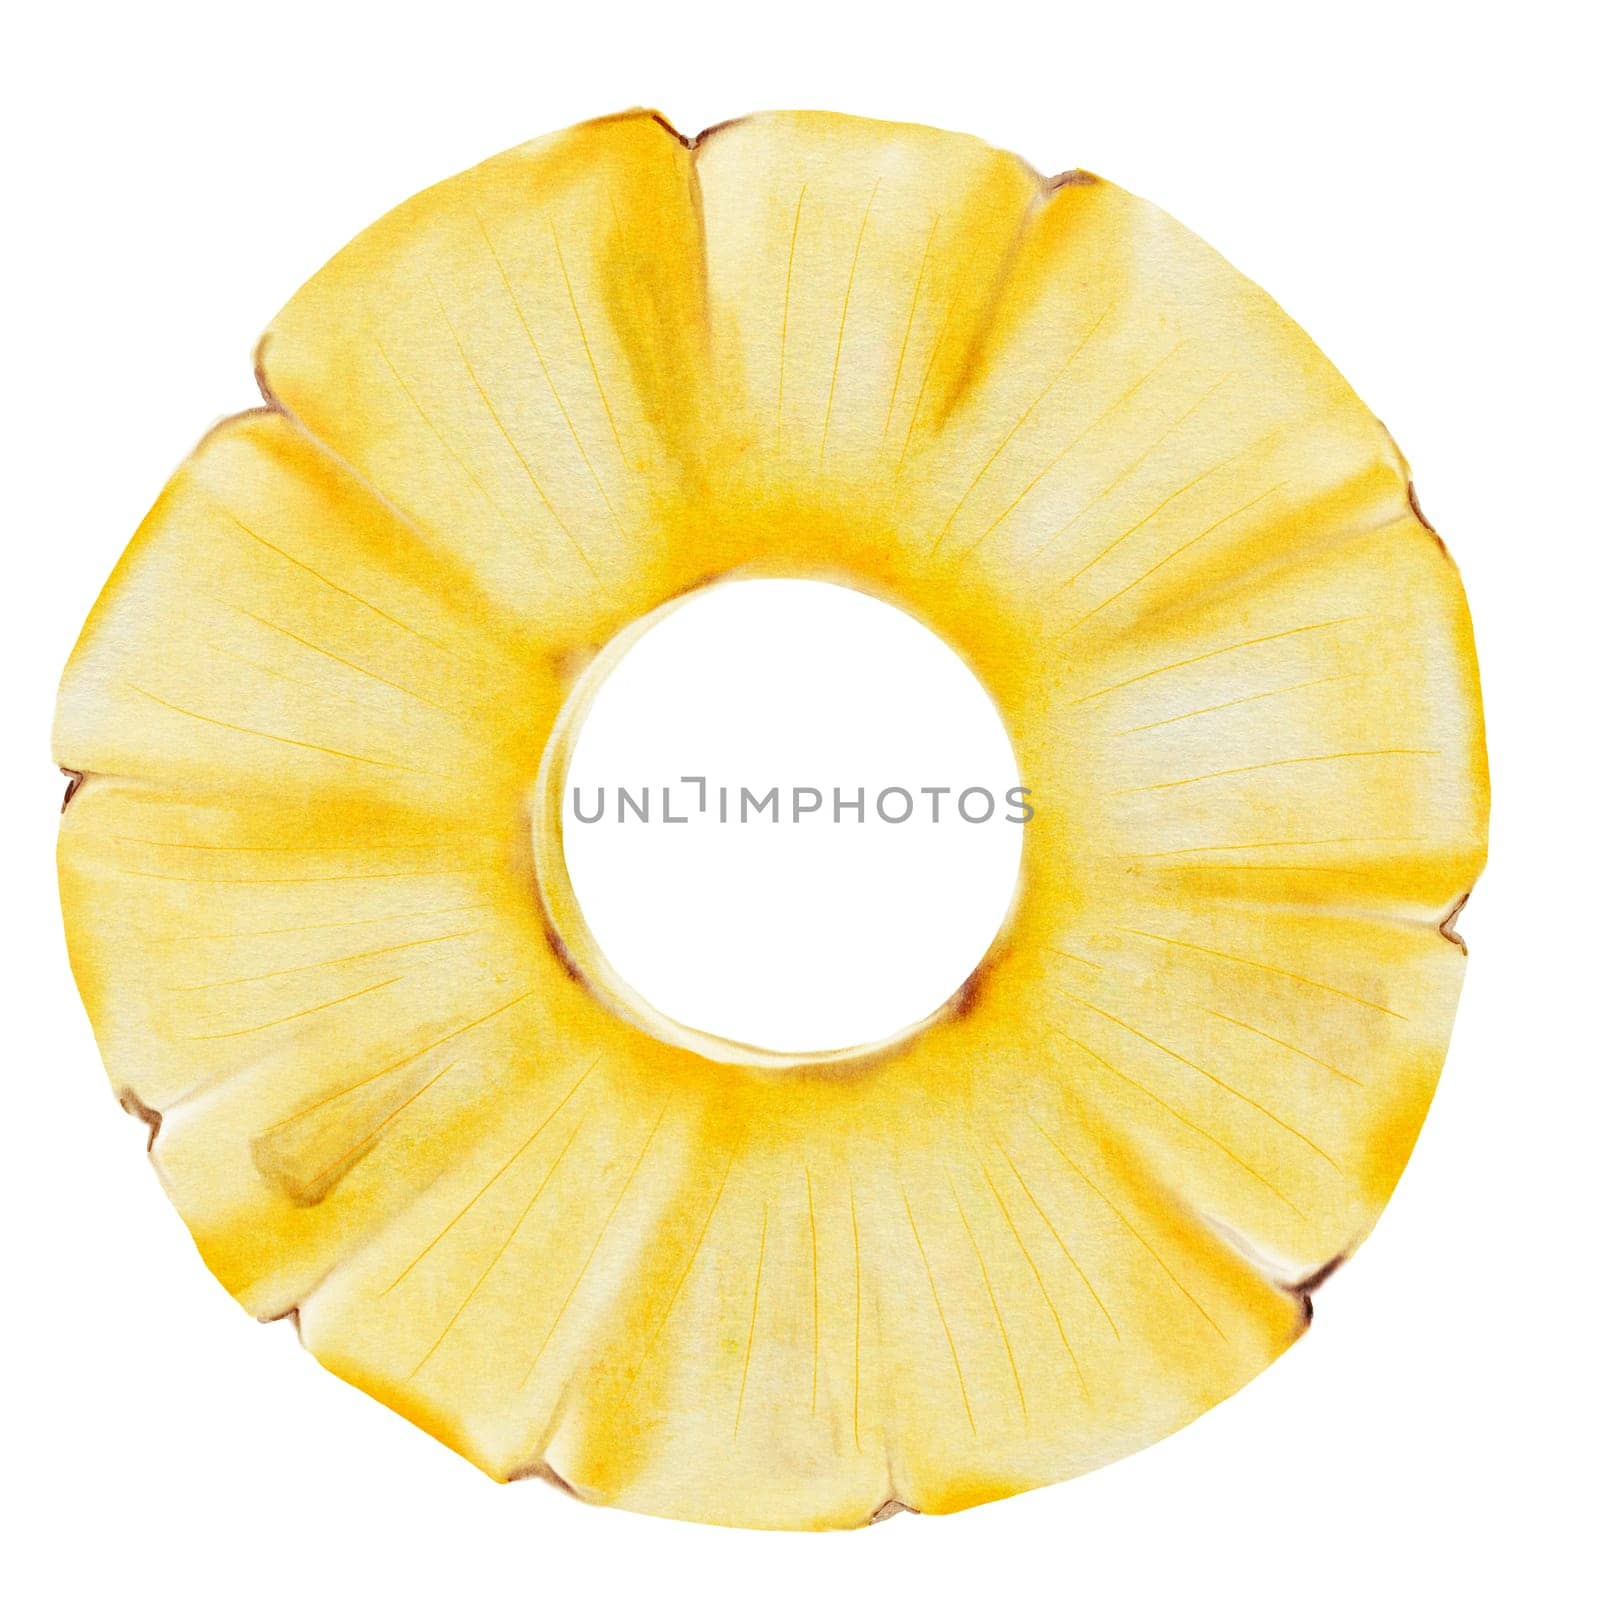 Pineapple sliced hand drawn watercolor. Clip art isolated on white background of exotic fruit. For cocktail menus, vegan recipes and packaging design for natural cosmetics. High quality illustration